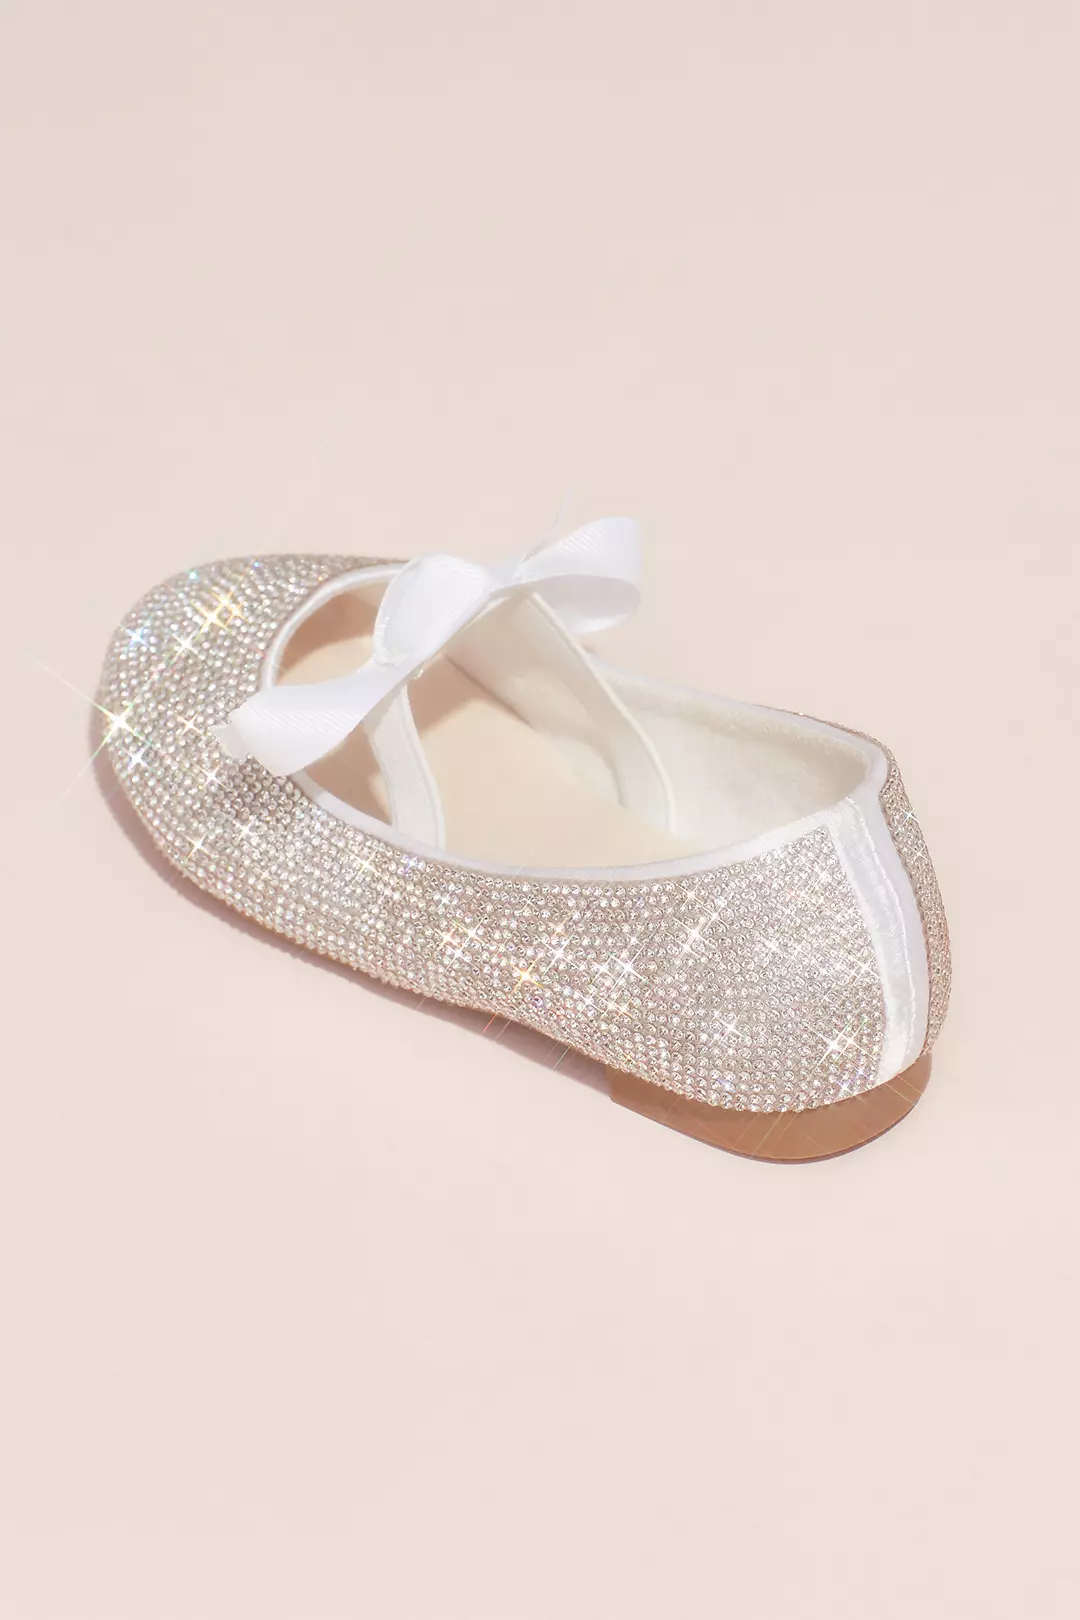 Girls Crystal Ballet Flats with Ribbon Bow Image